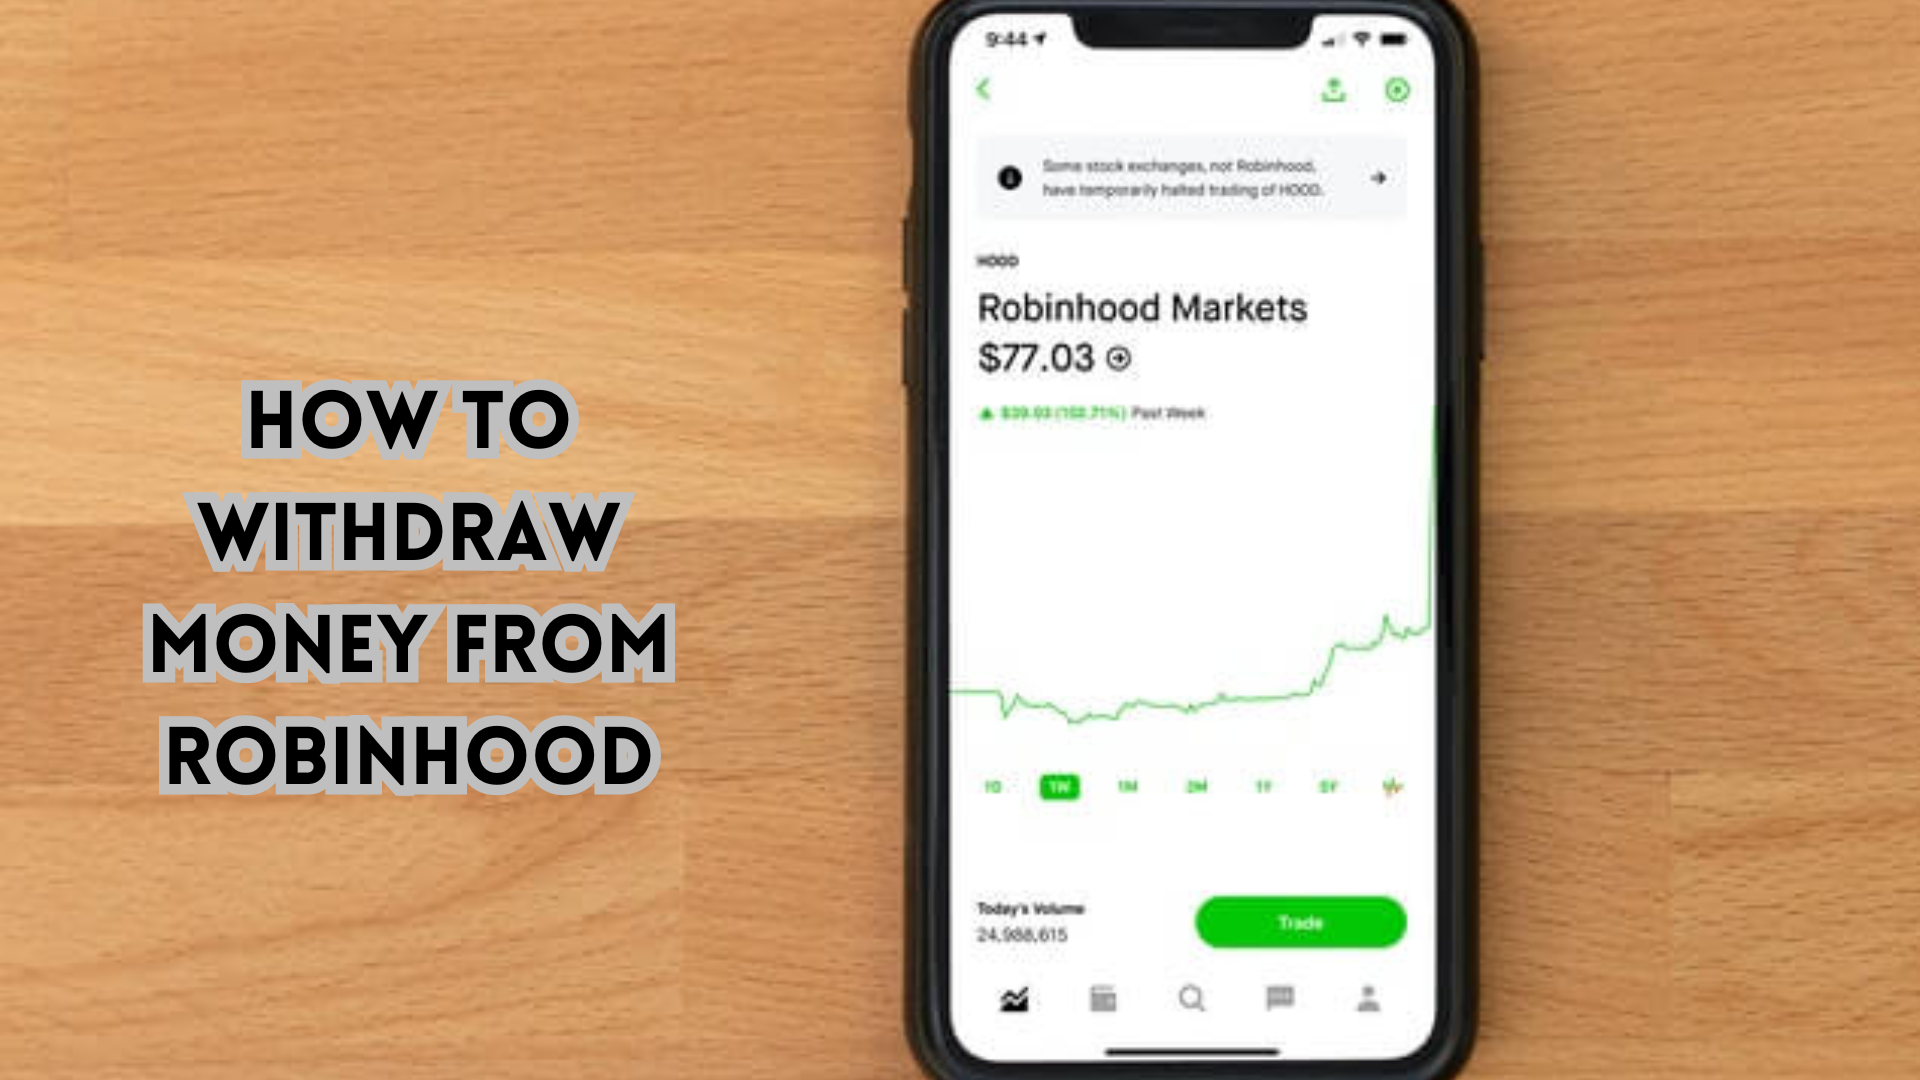 How to Withdraw Money from Robinhood.